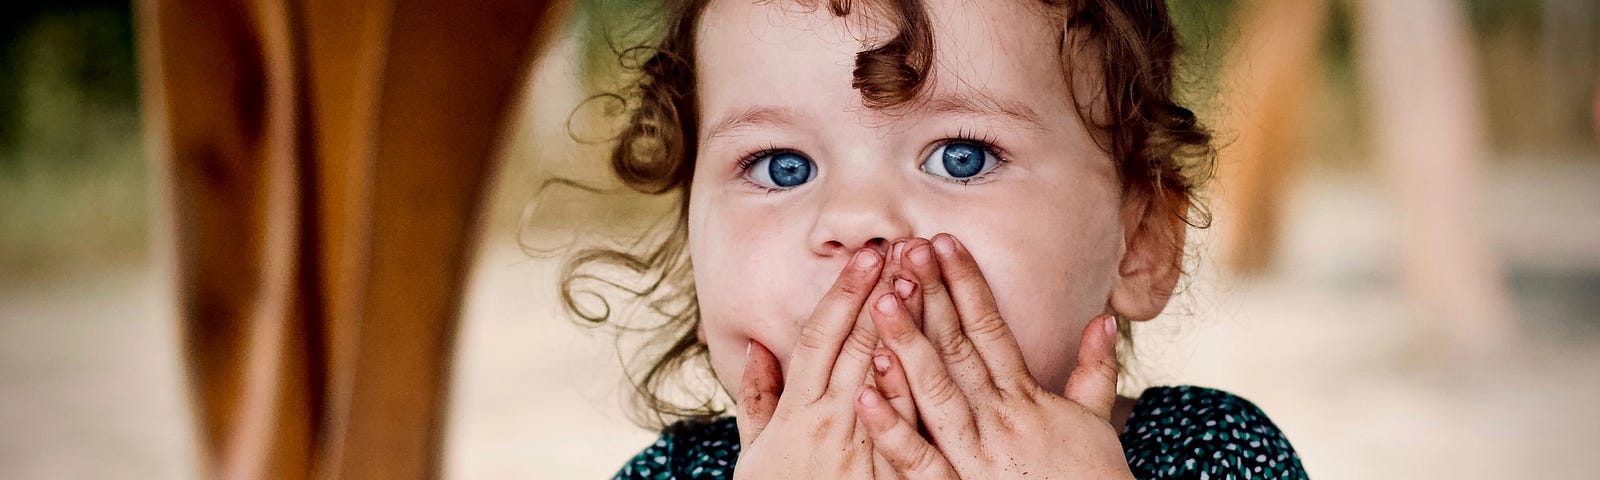 Little girl with hands over her mouth